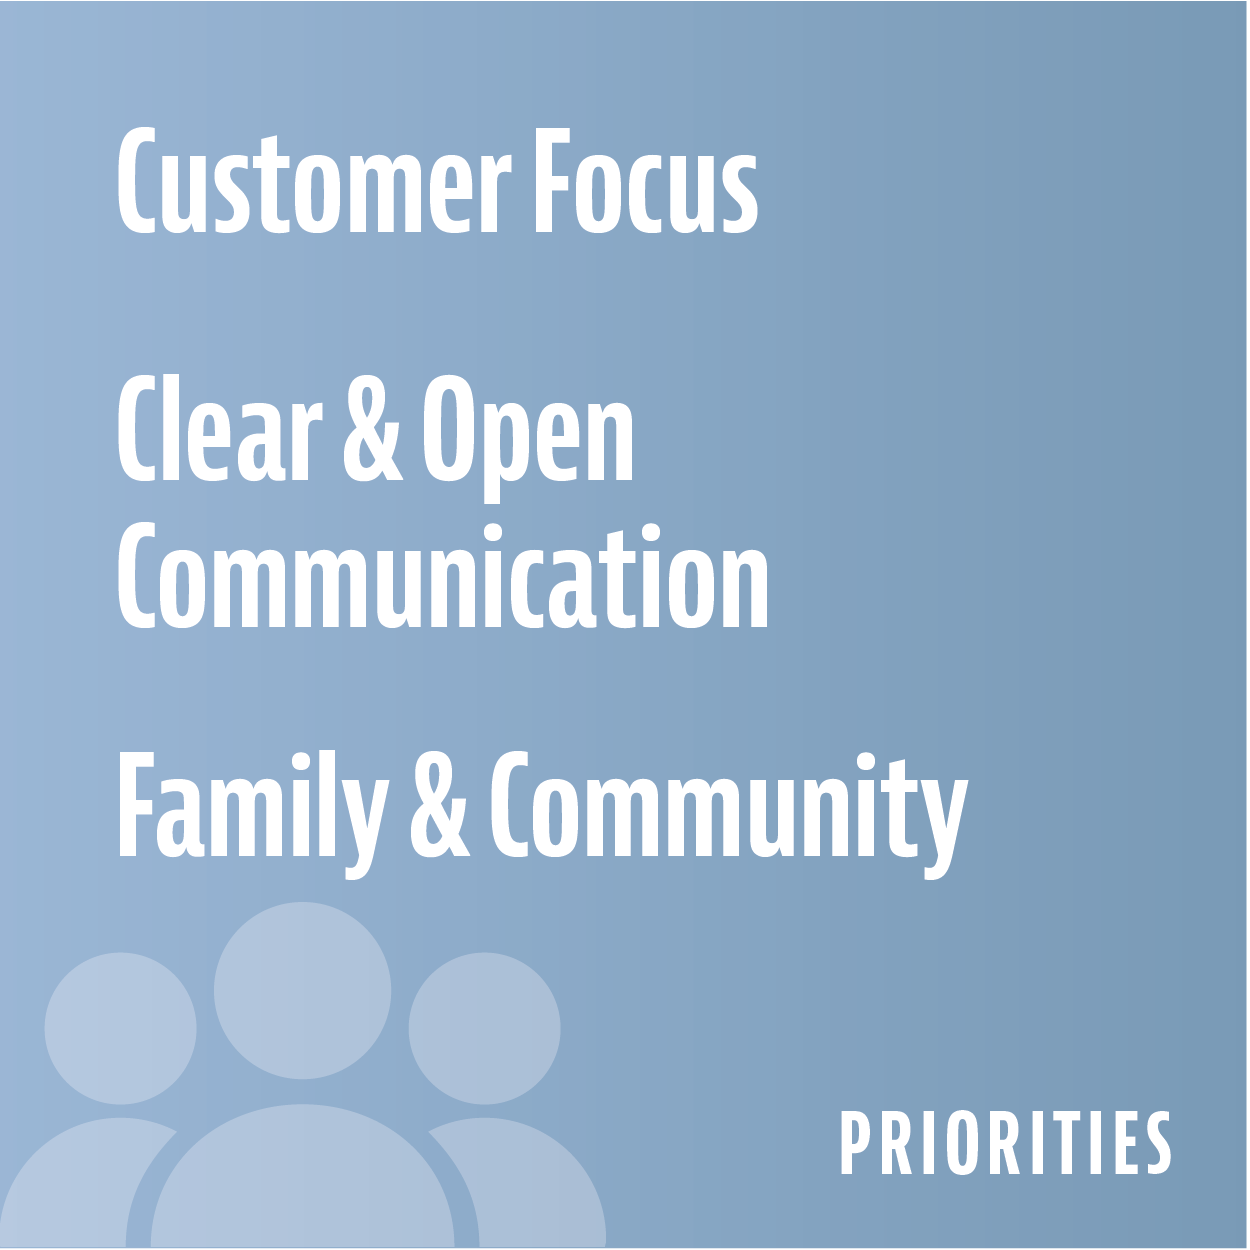 Customer Focus, Clear & Open Communication, Family & Community